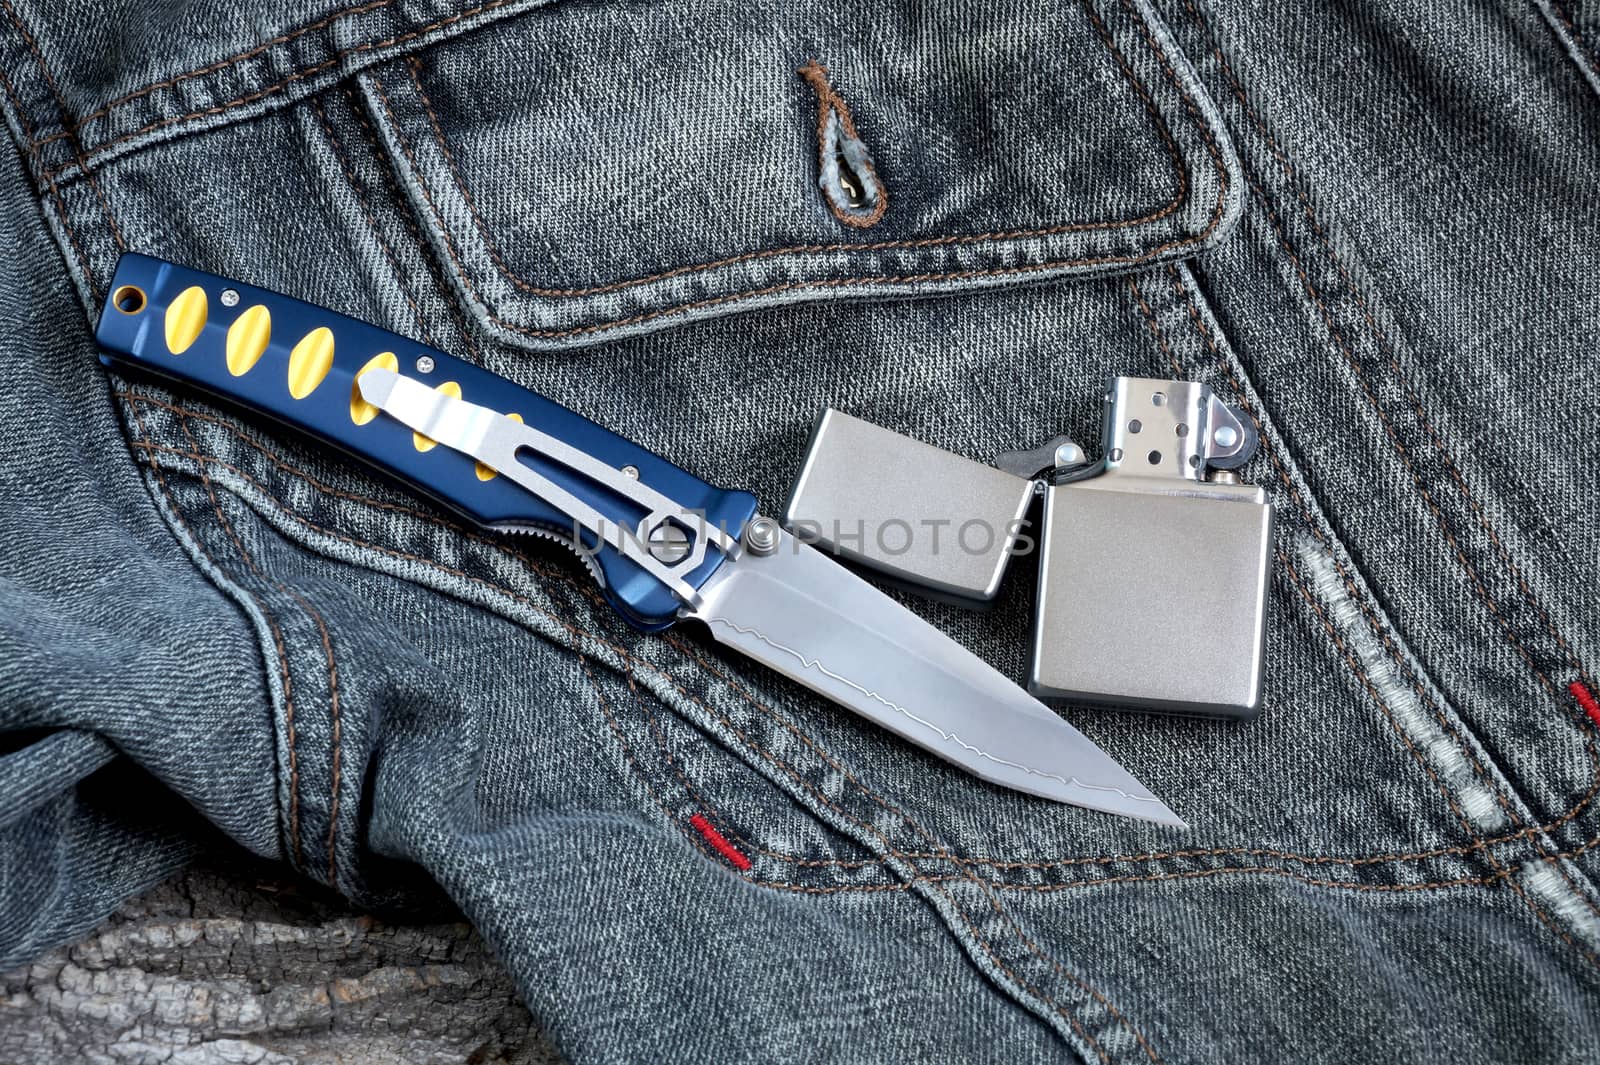 Penknife with a blade from Damask steel with a petrol lighter